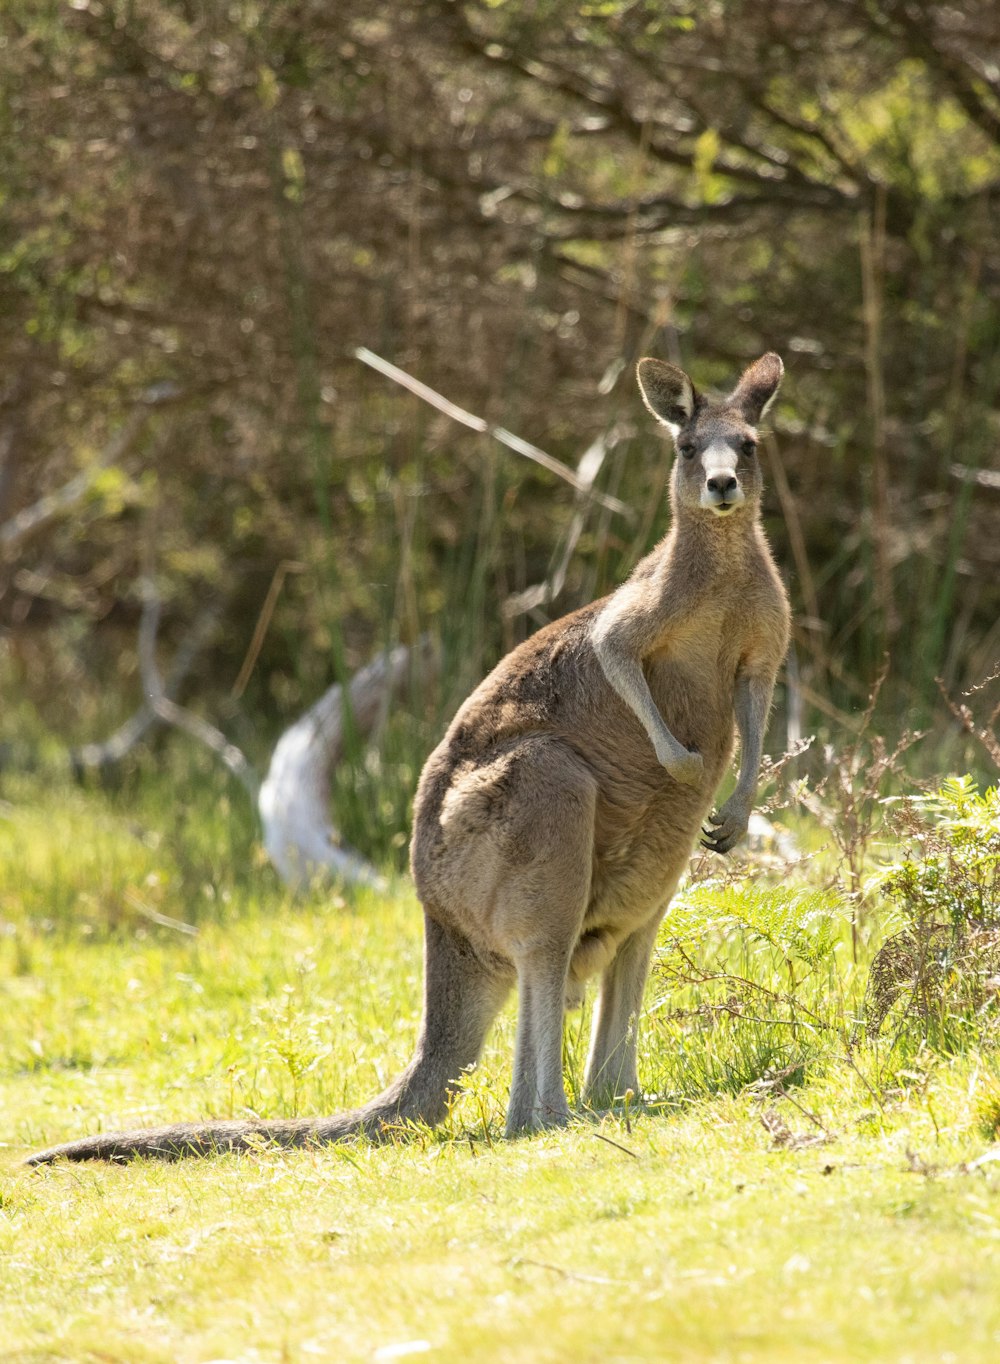 a kangaroo is standing in the grass near some trees